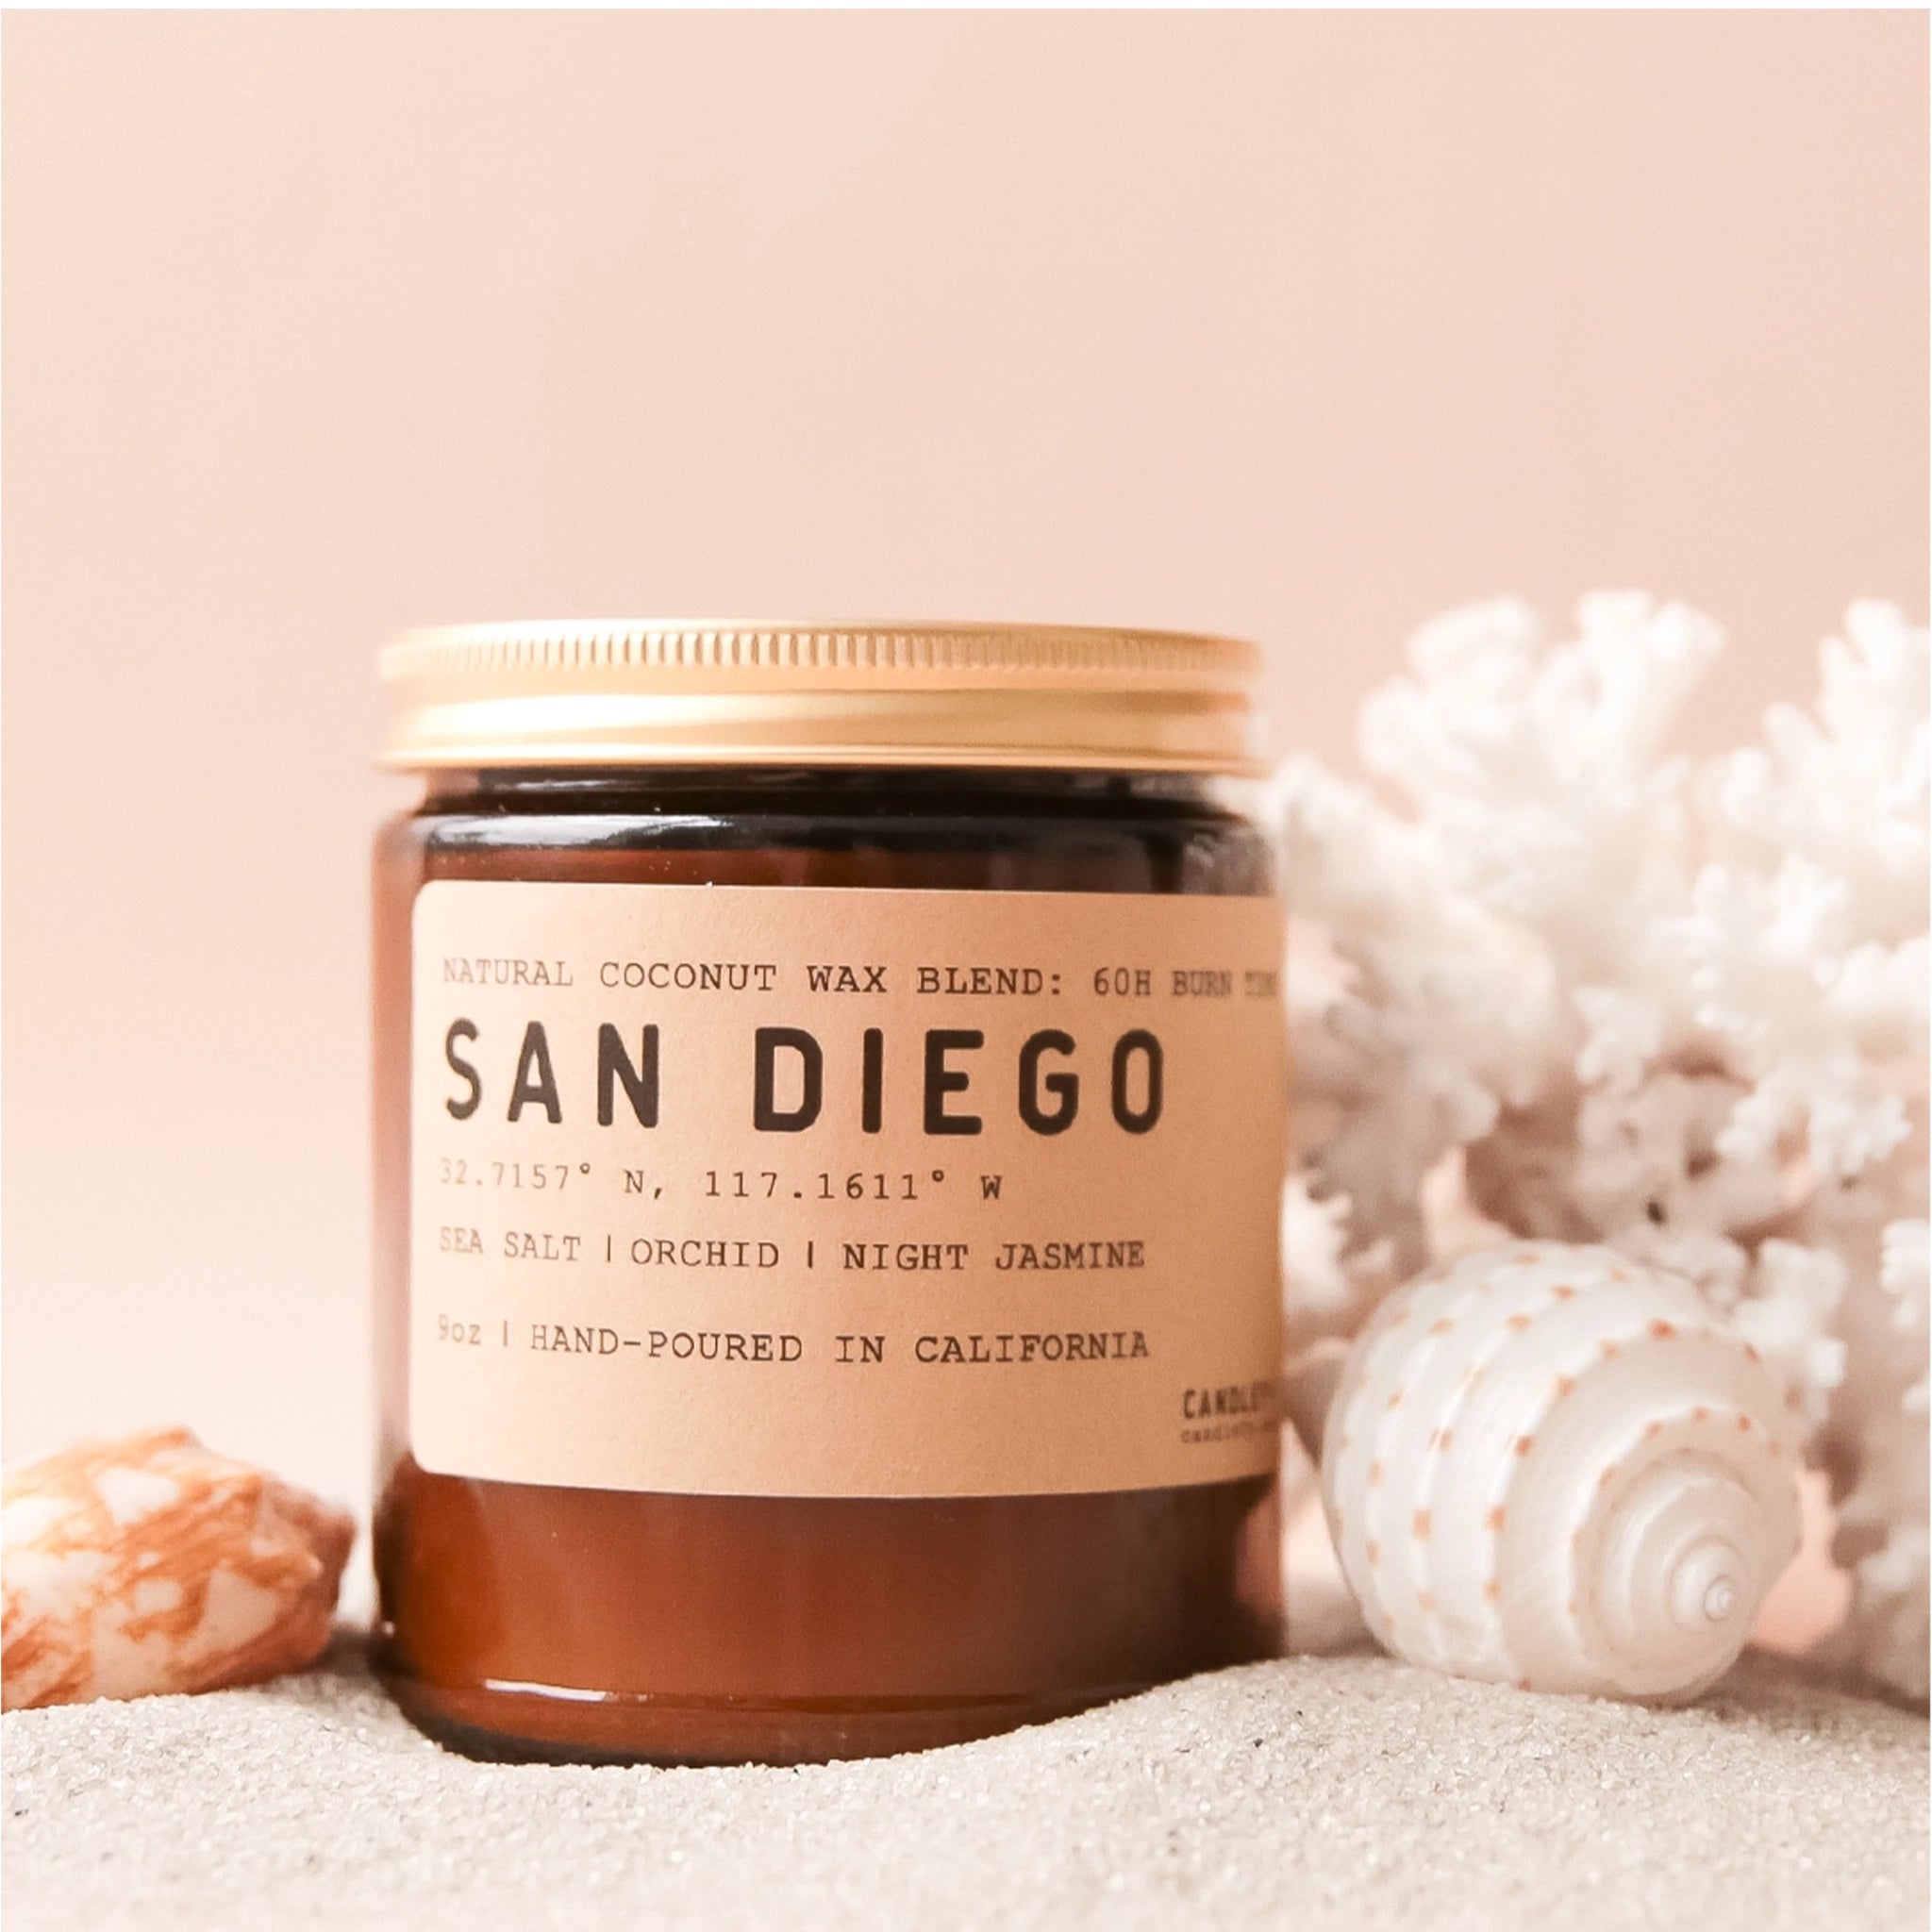 On a light pink background is a amber glass candle with a gold lid and a label that reads, "San Diego" and is staged next to beach inspired items like shells and sand. 